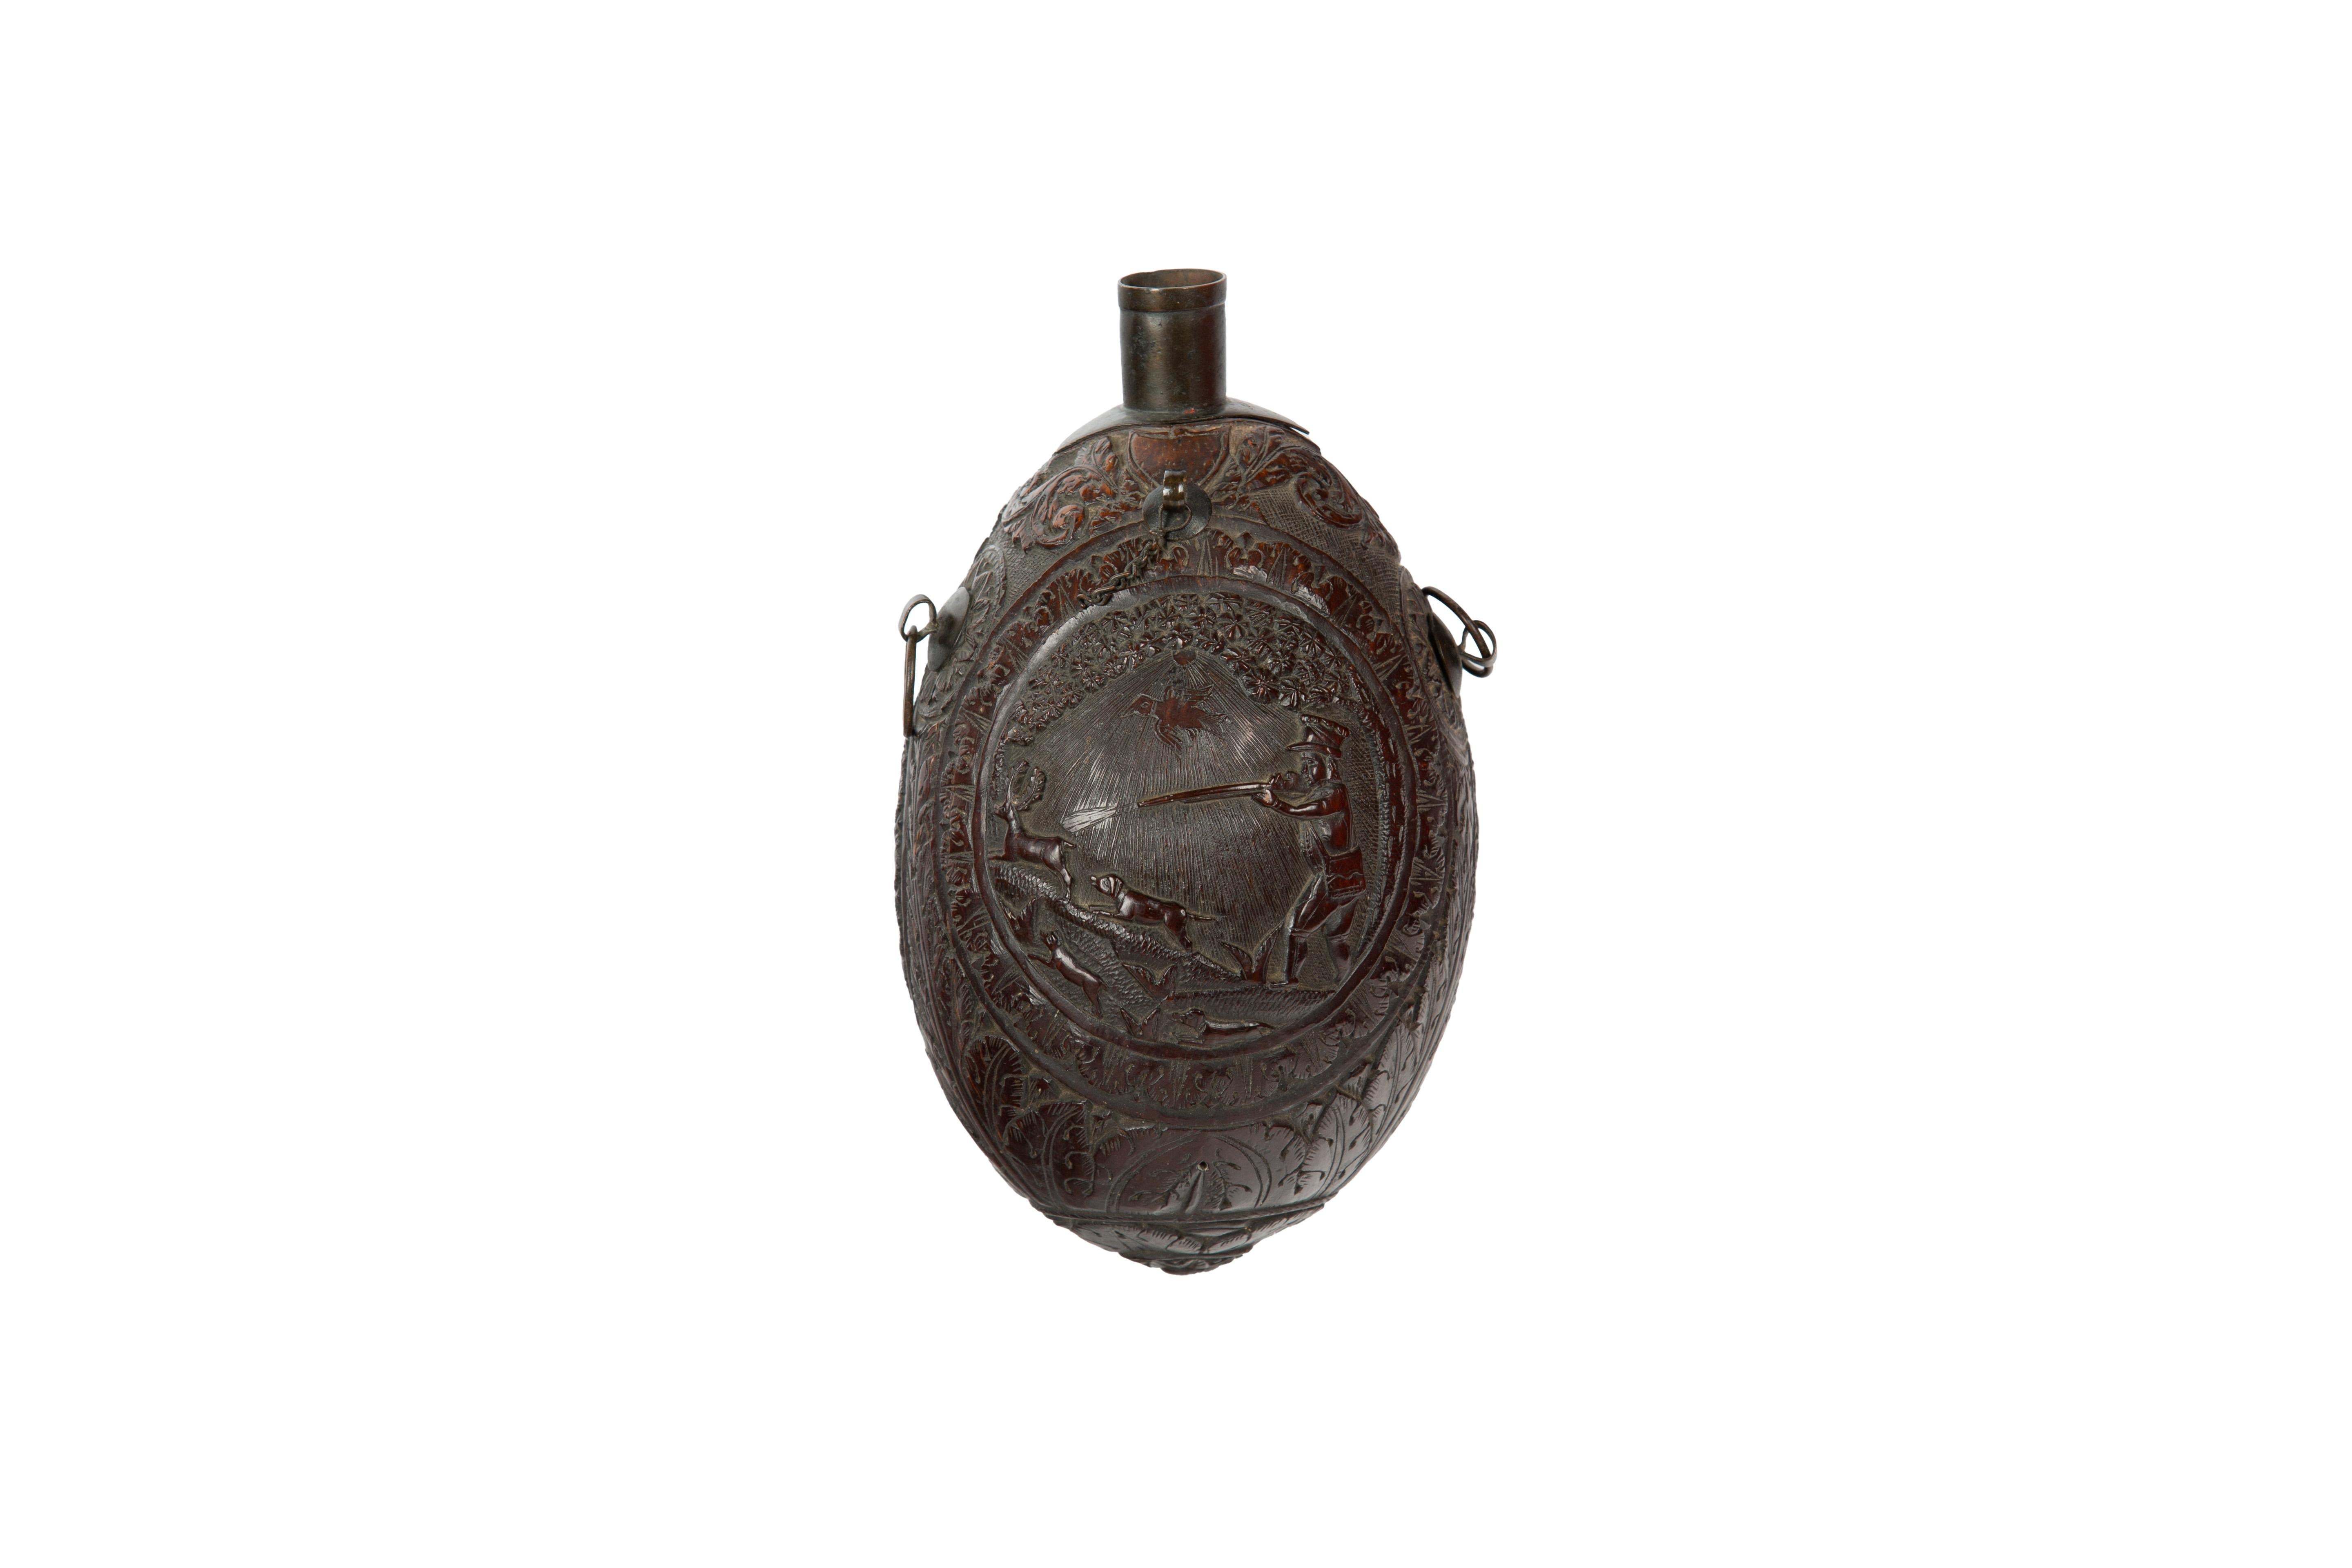 This 18th century carved bugbear coconut flask is a fascinating artifact that showcases both artistic craftsmanship and historical significance. The flask is adorned with a relief-carved hunting scene, depicting a gentleman with a rifle, accompanied